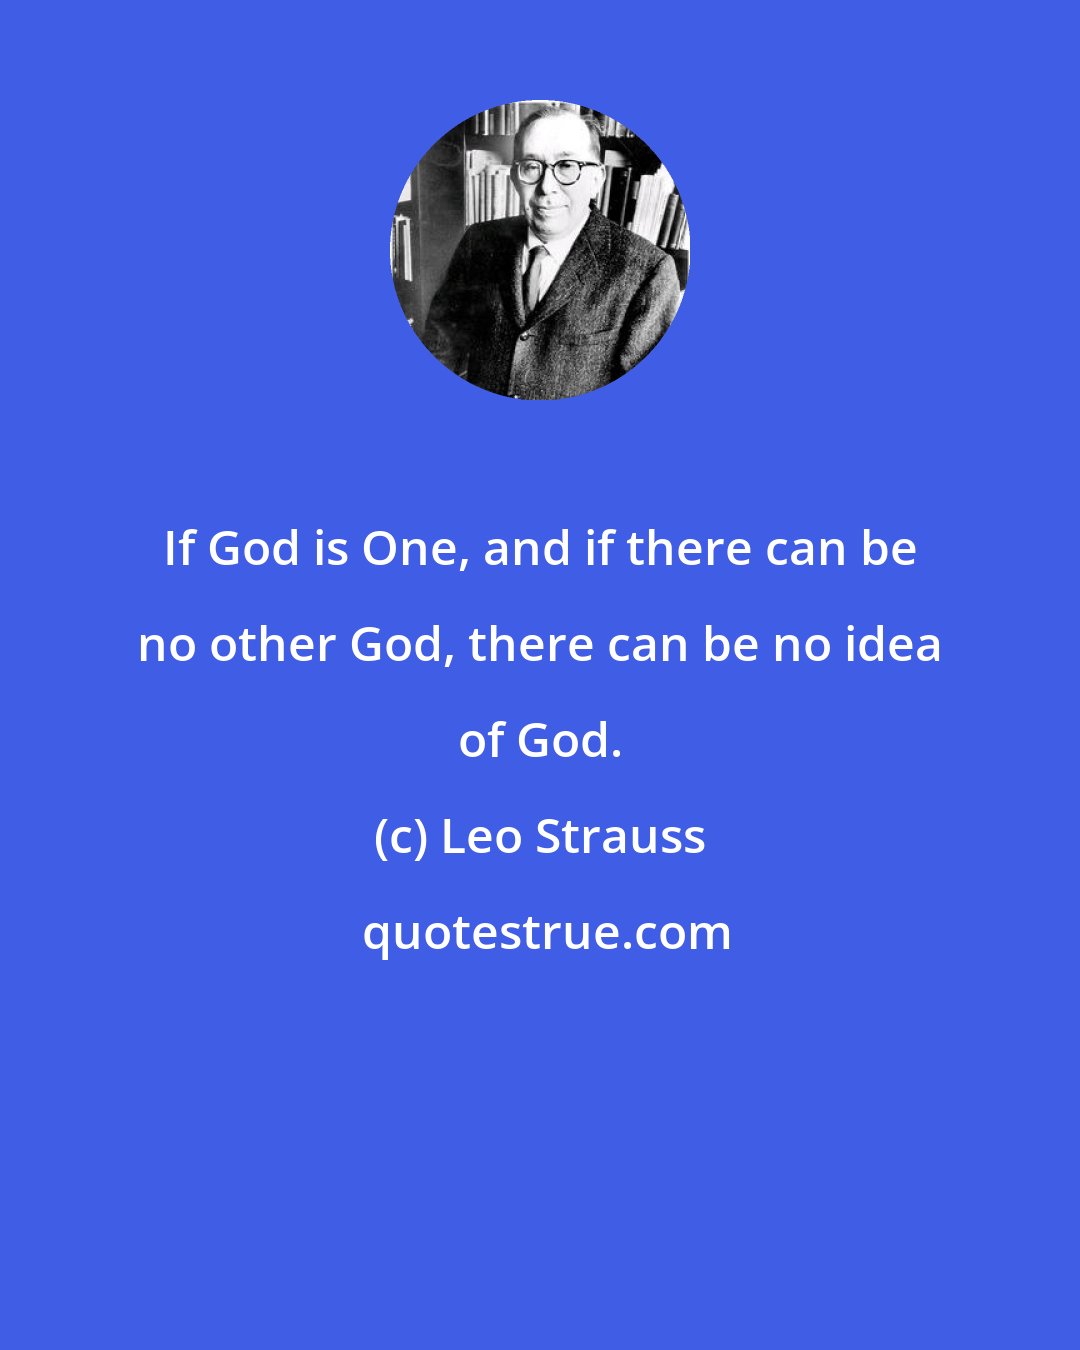 Leo Strauss: If God is One, and if there can be no other God, there can be no idea of God.